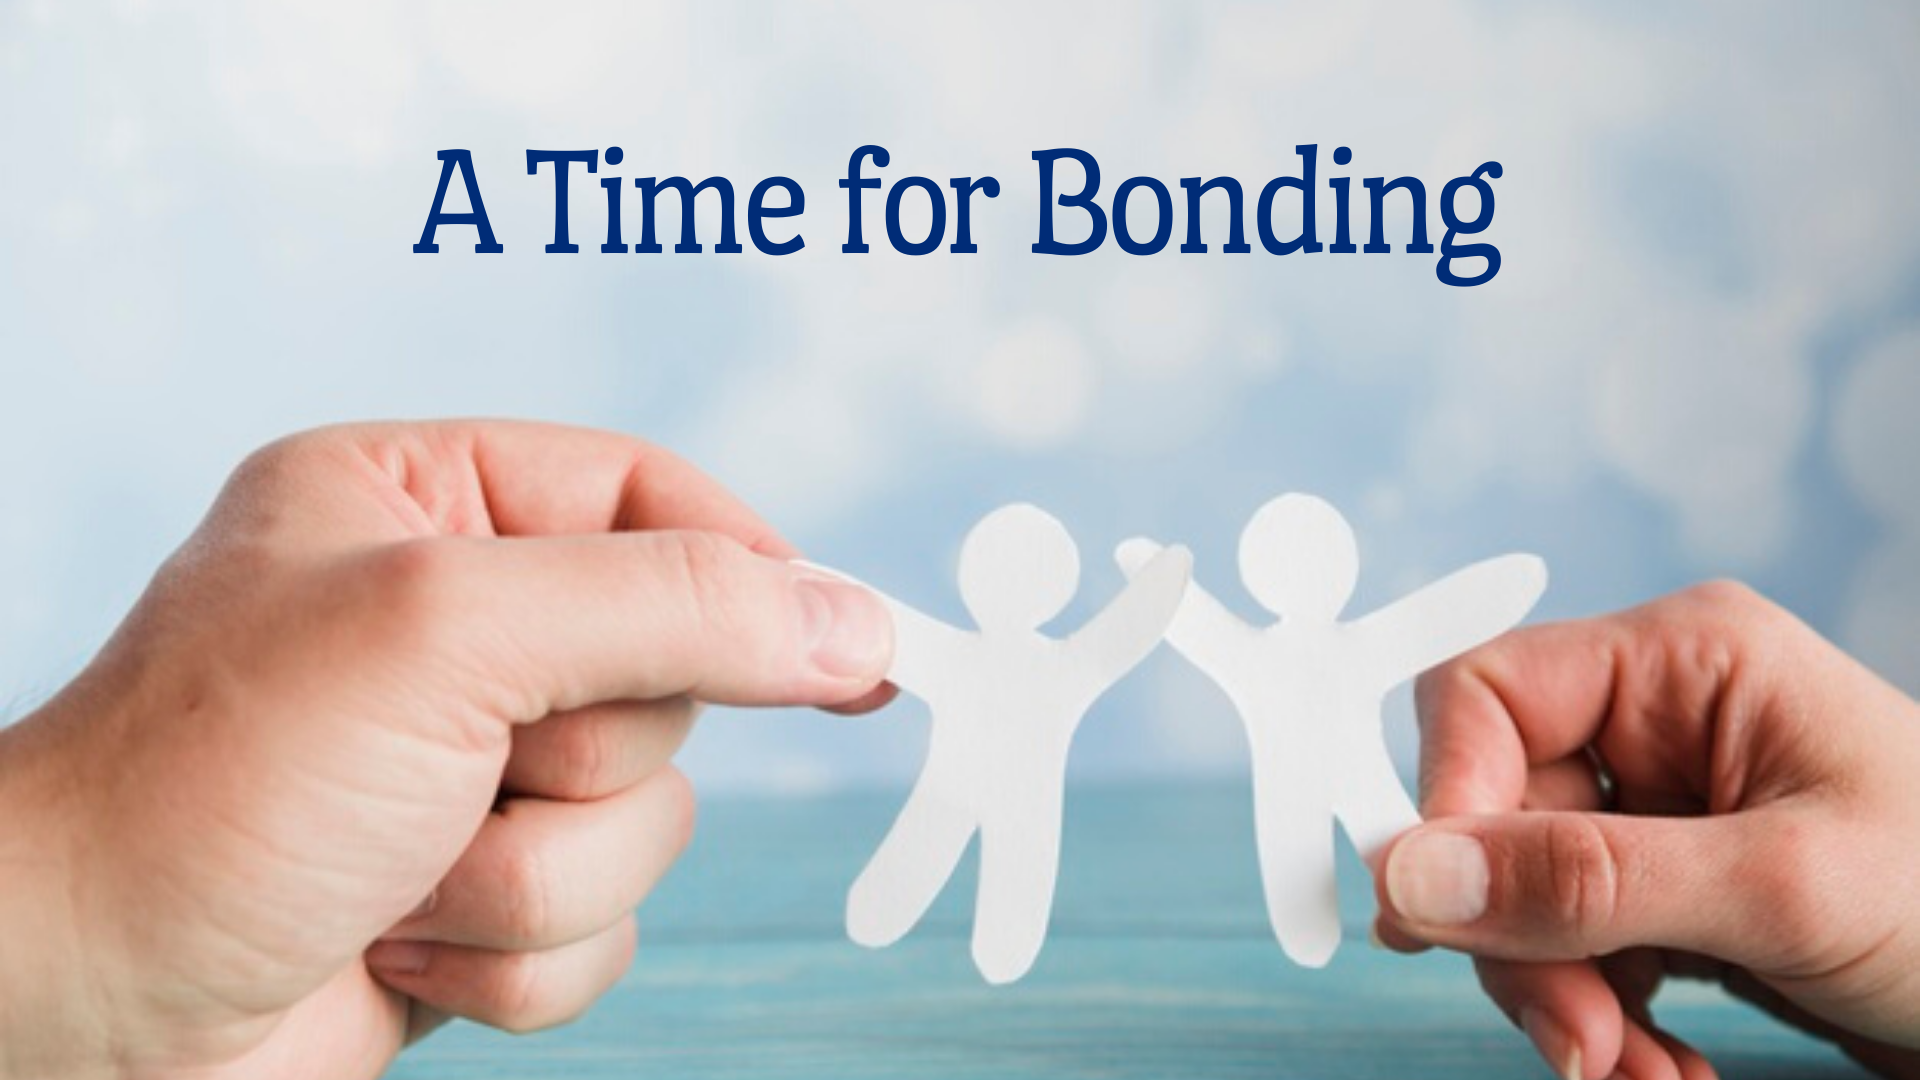 A time for bonding